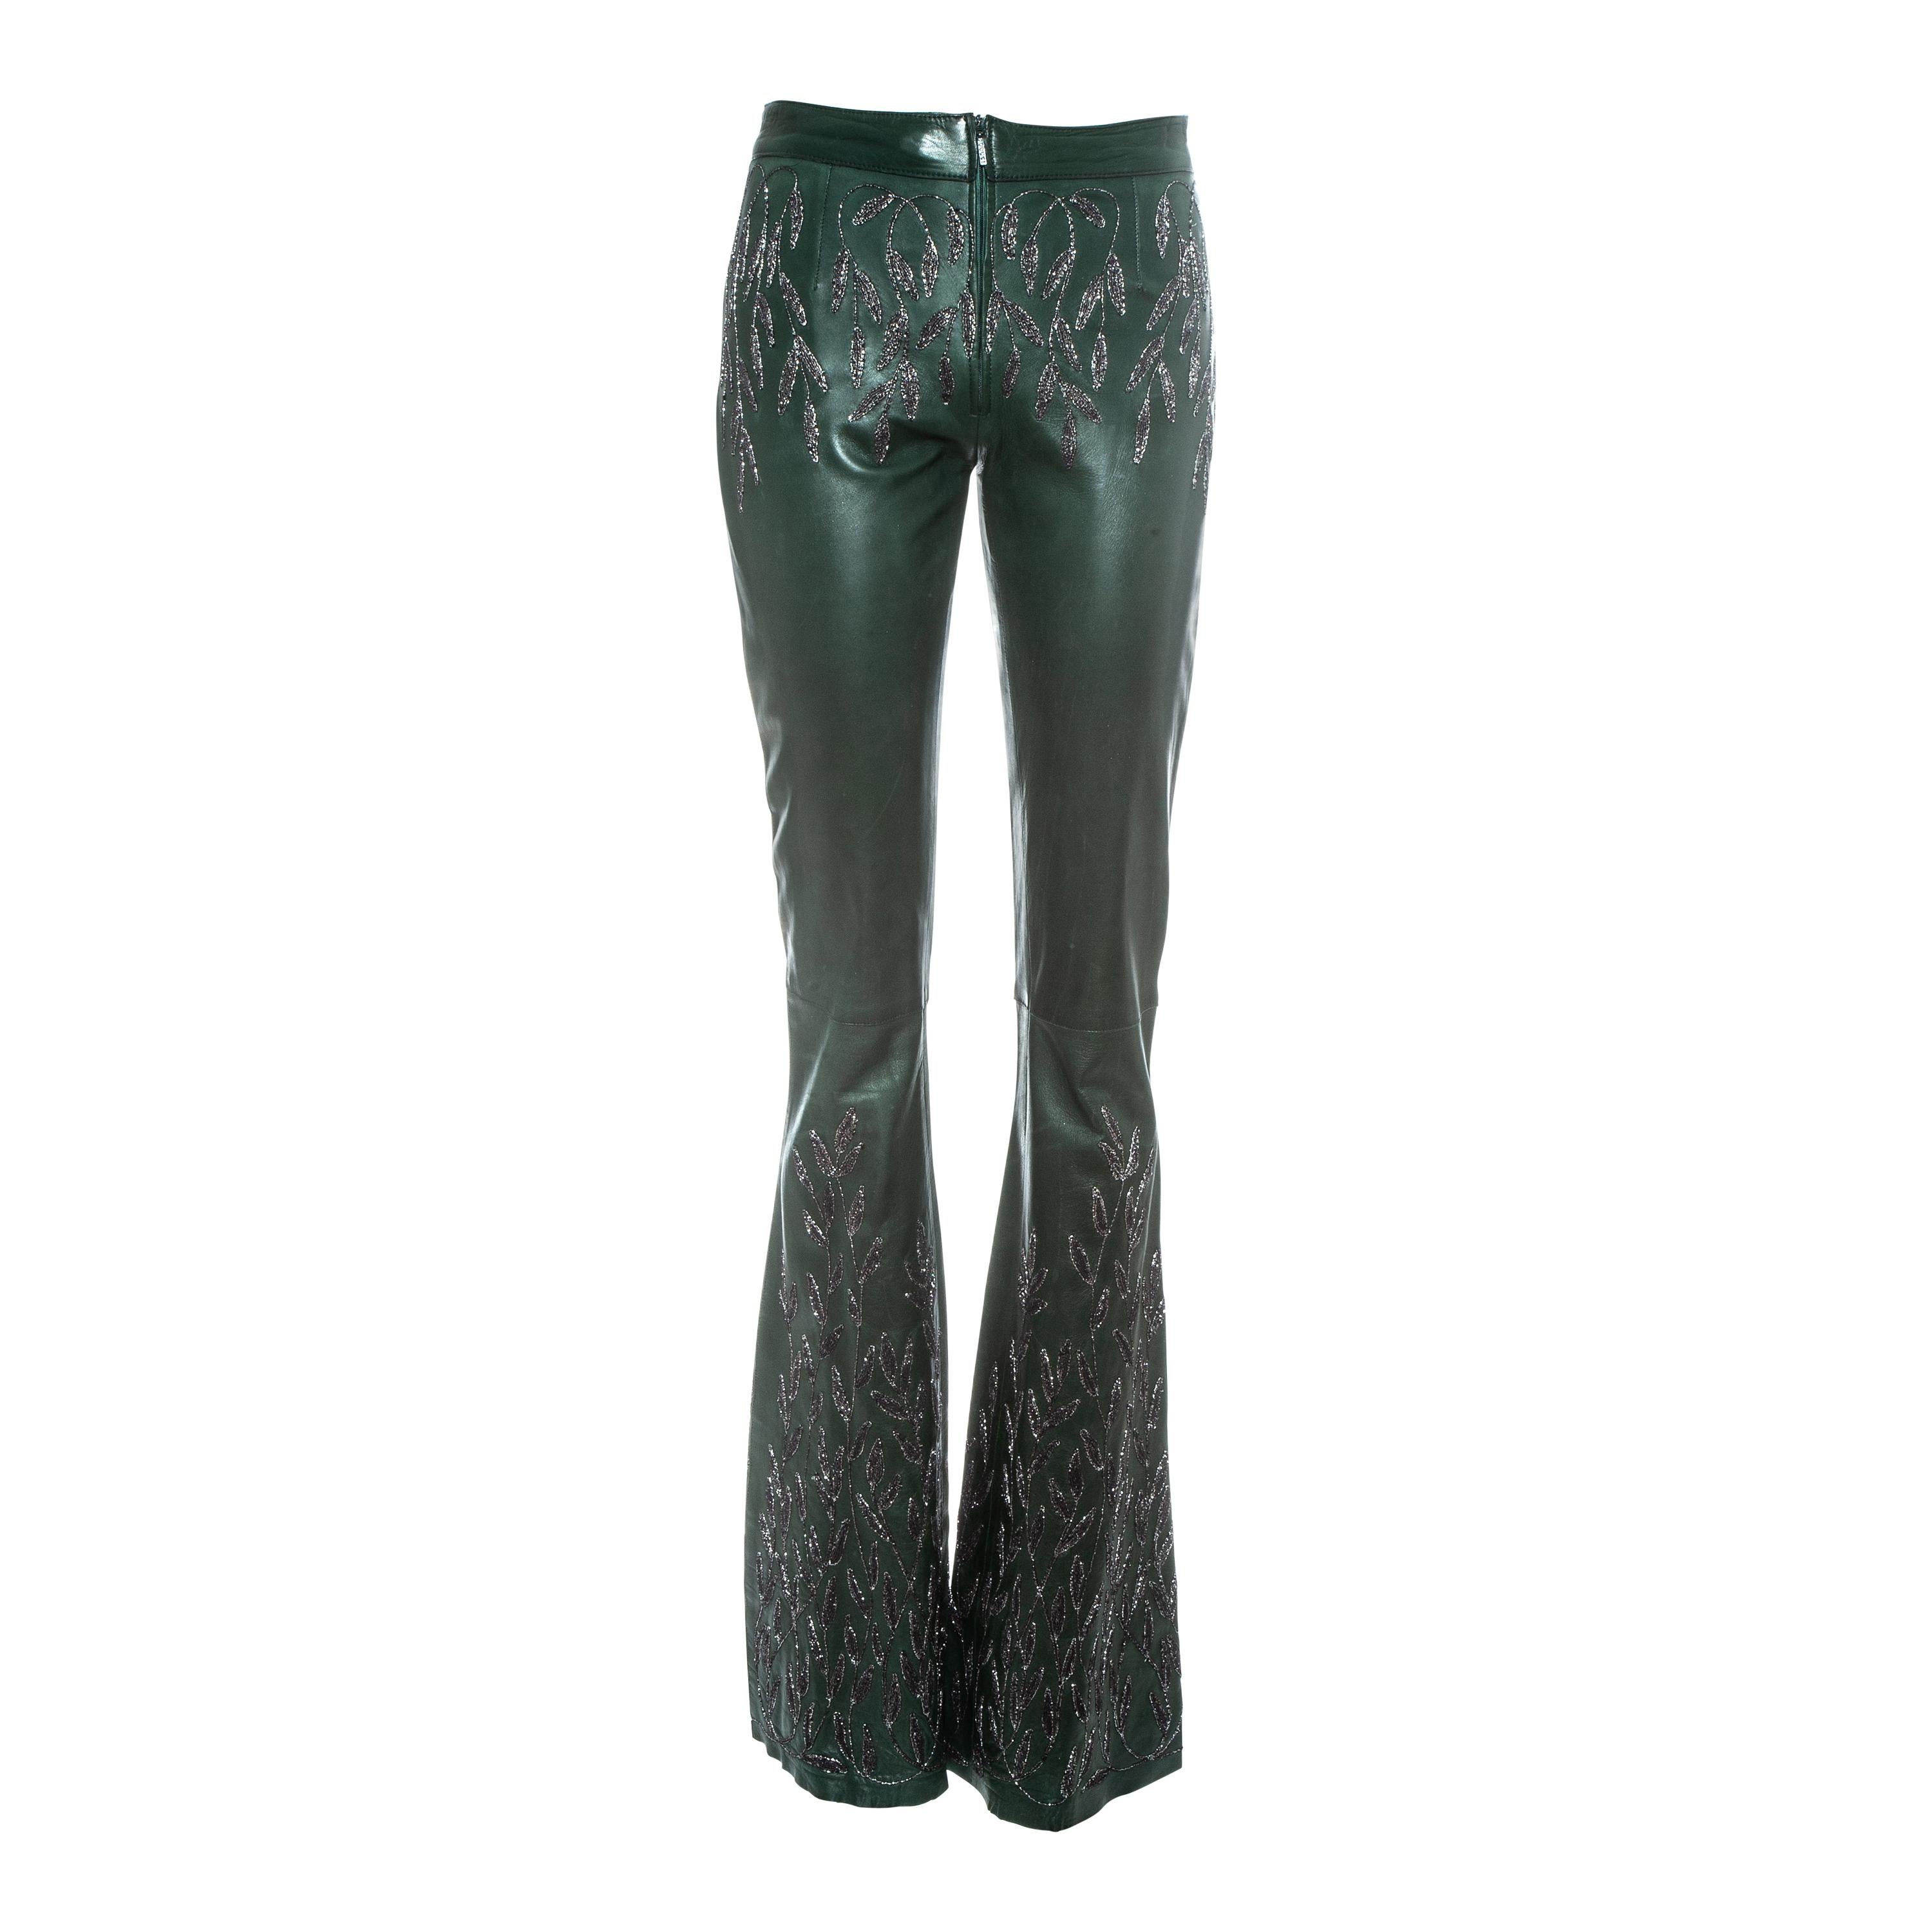 Gucci by Tom Ford green embroidered leather flared pants, fw 1999